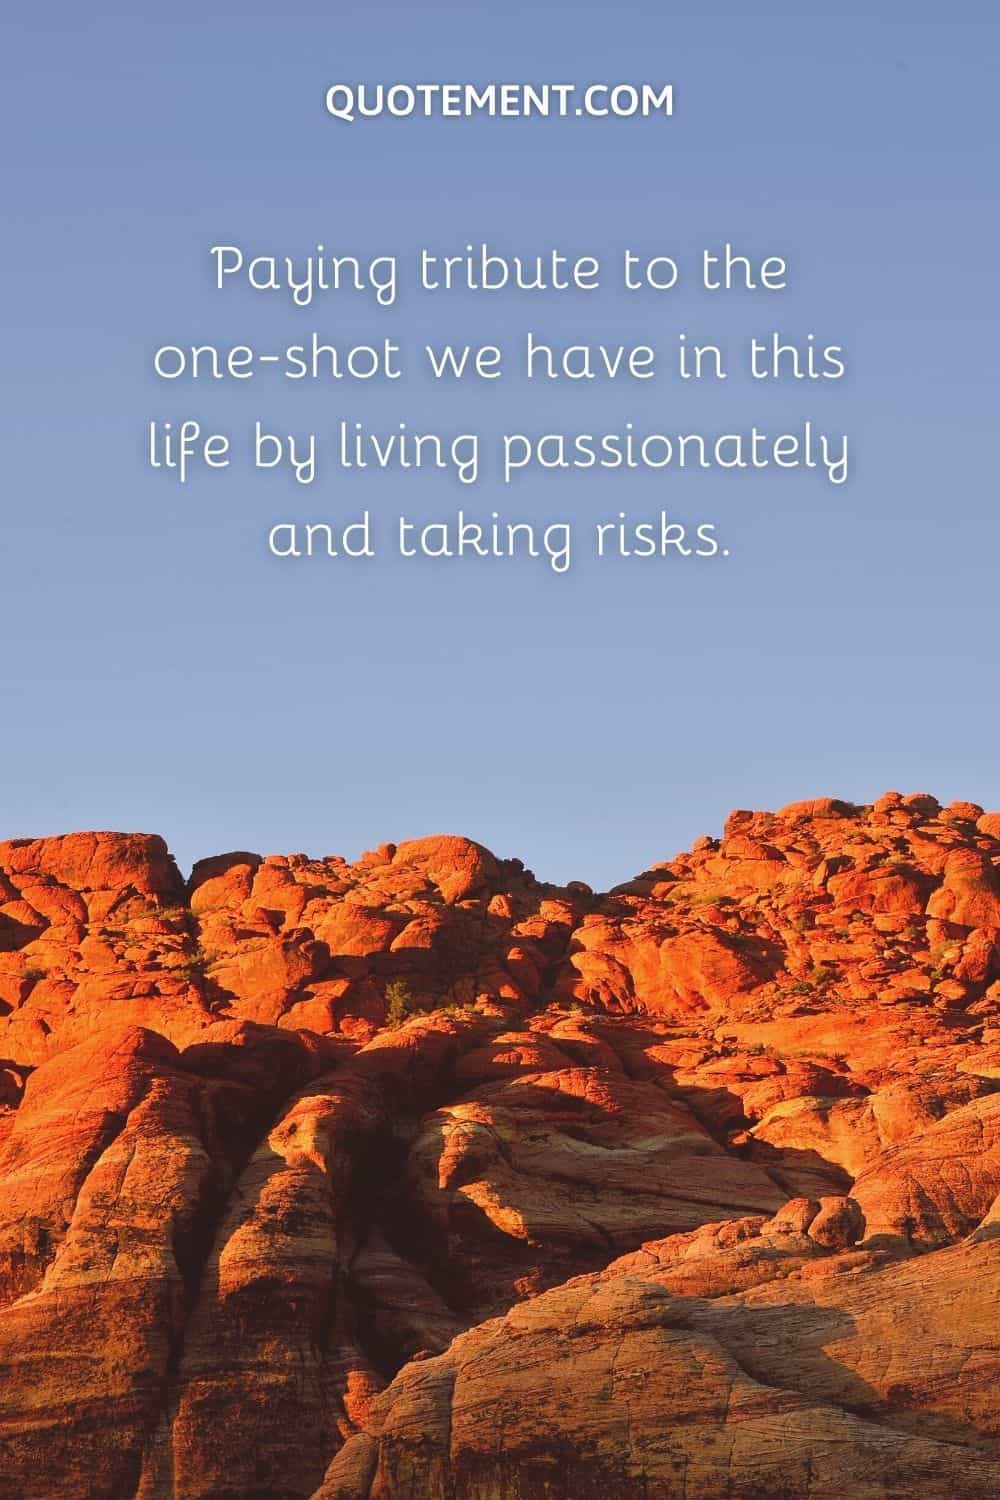 Paying tribute to the one-shot we have in this life by living passionately and taking risks.